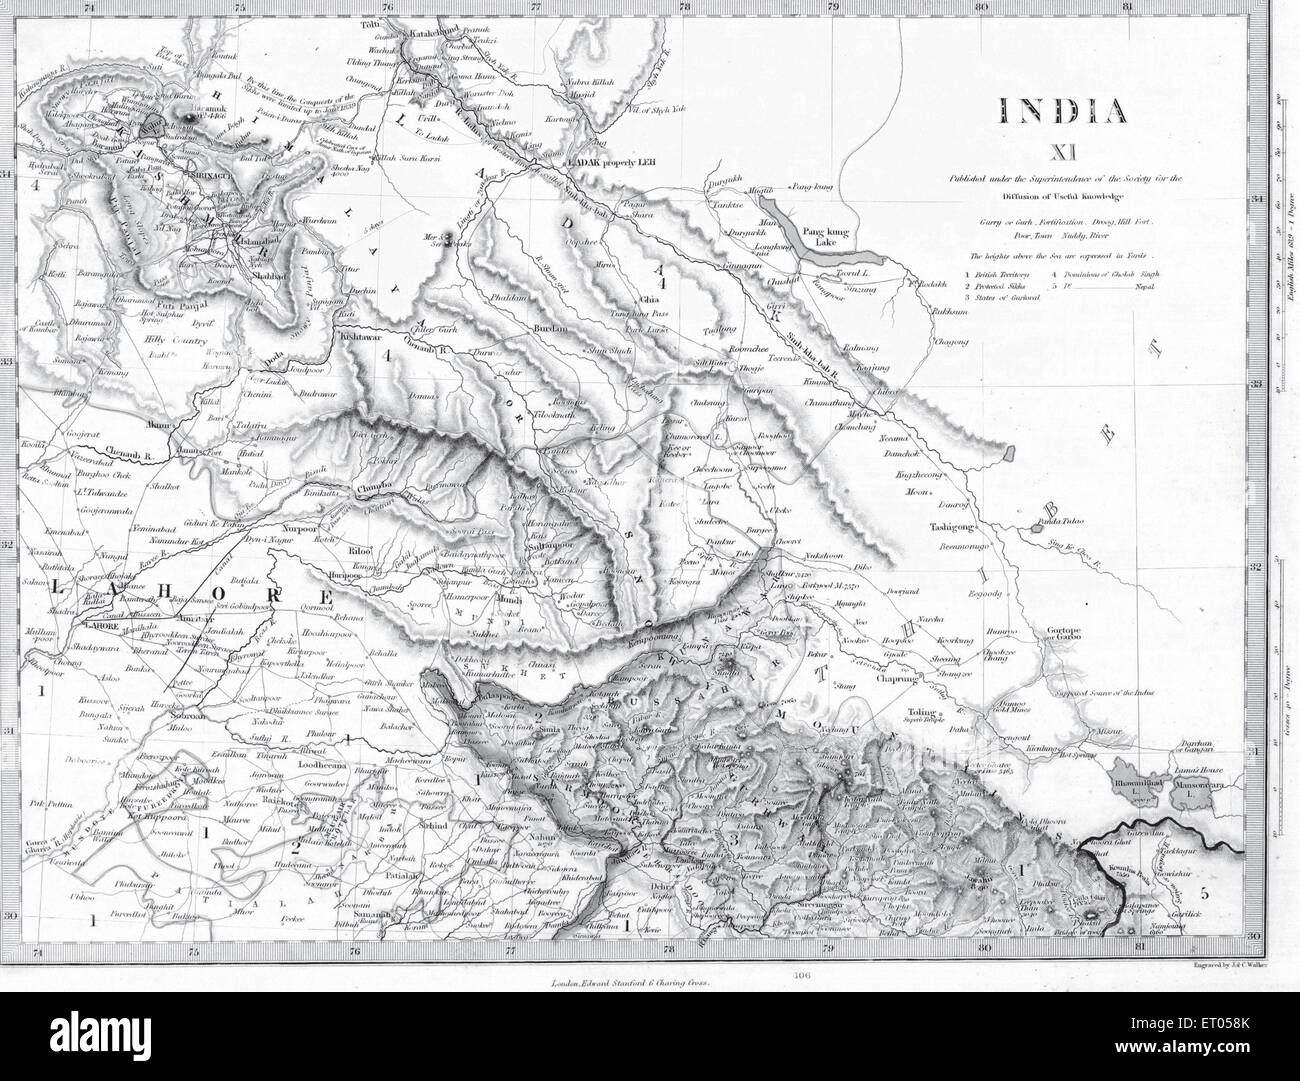 A map of India for the diffusion of useful knowledge Stock Photo